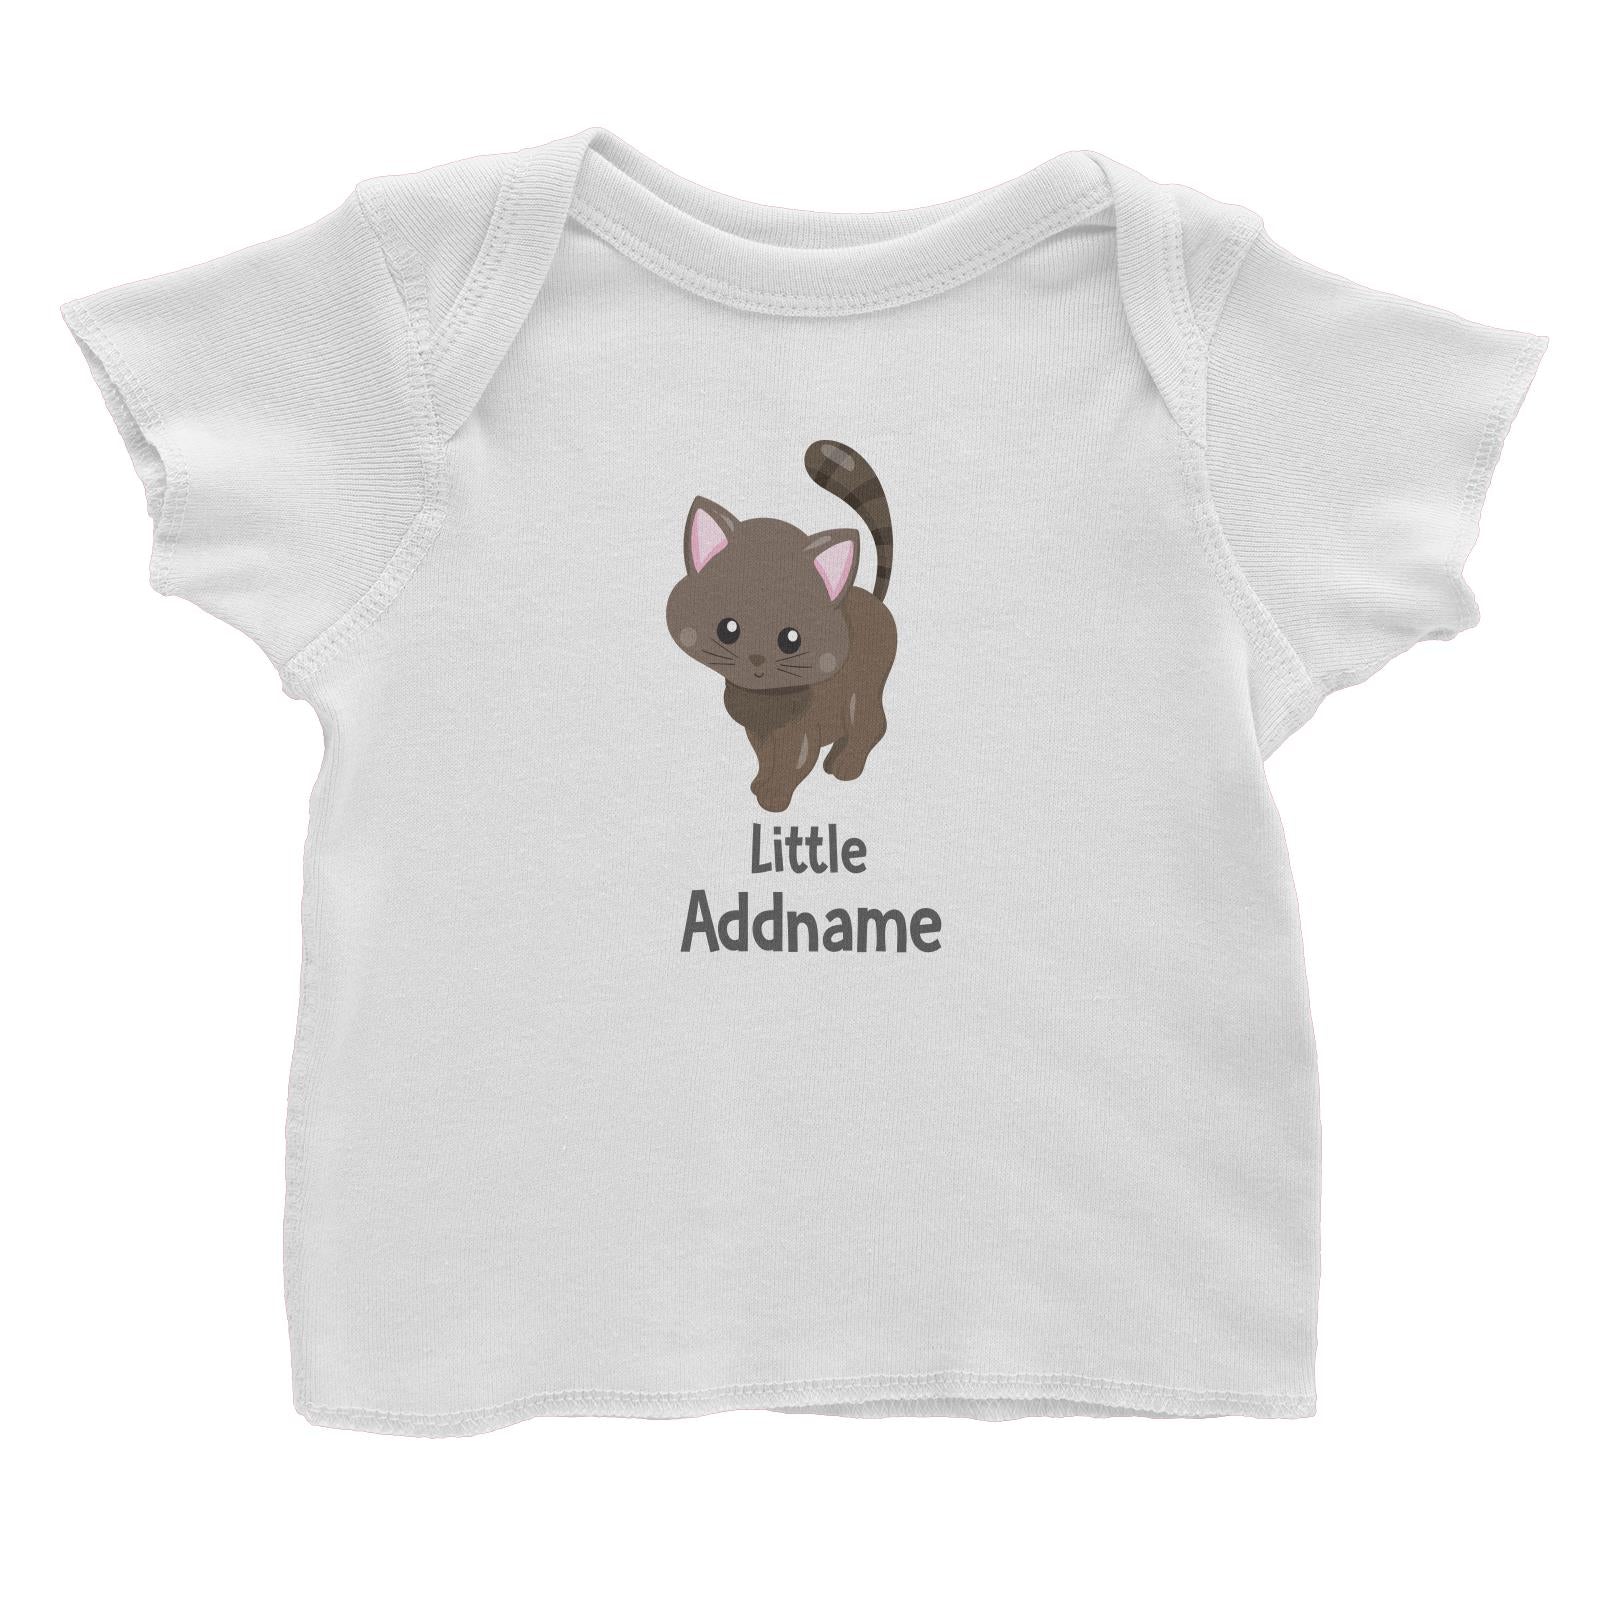 Adorable Cats Dark Brown Cat Little Addname Baby T-Shirt